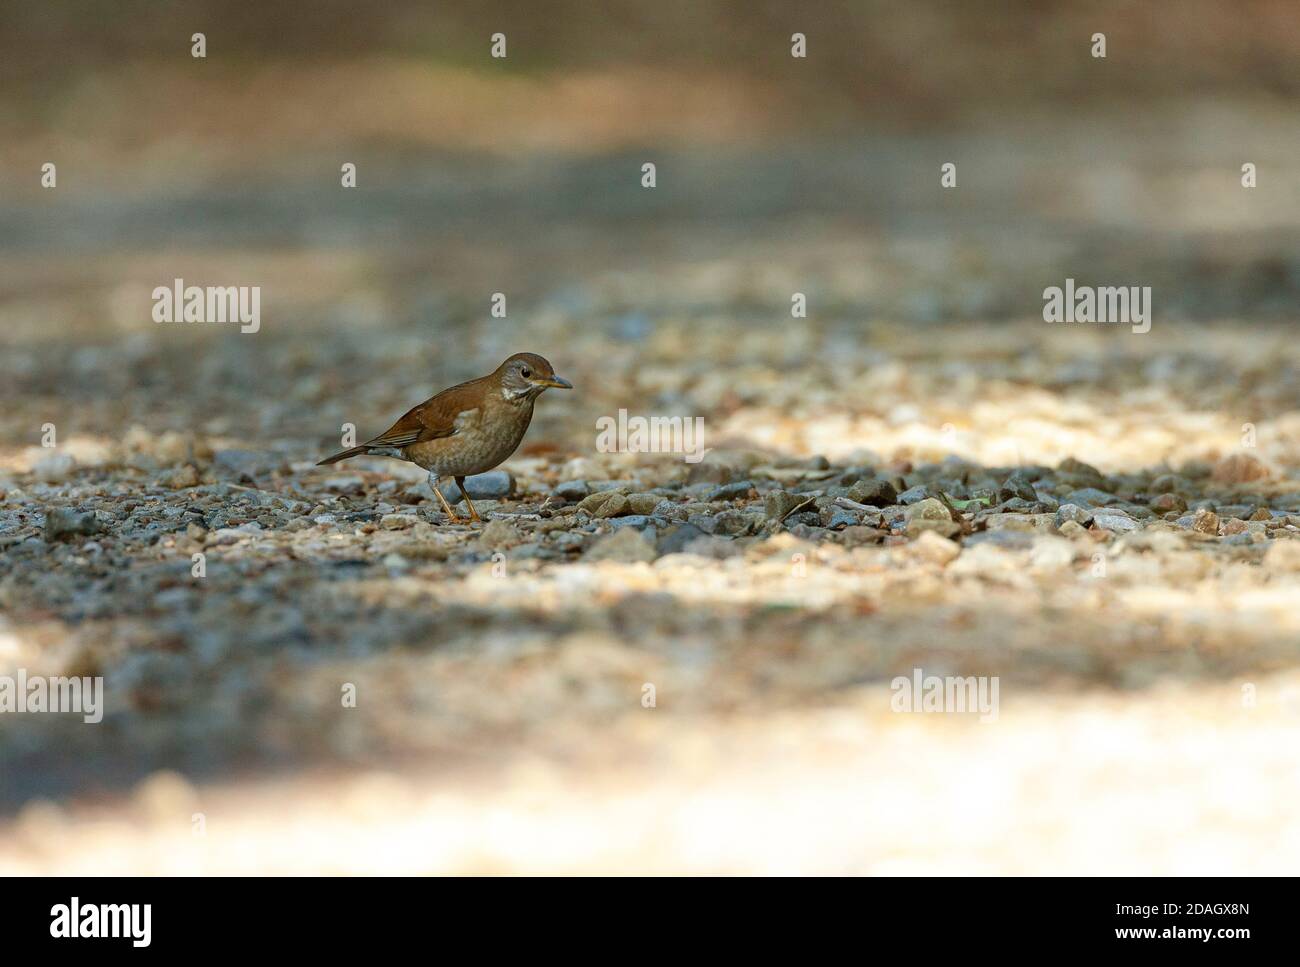 pale thrush (Turdus pallidus), standing on the ground of a dirt road, Japan Stock Photo